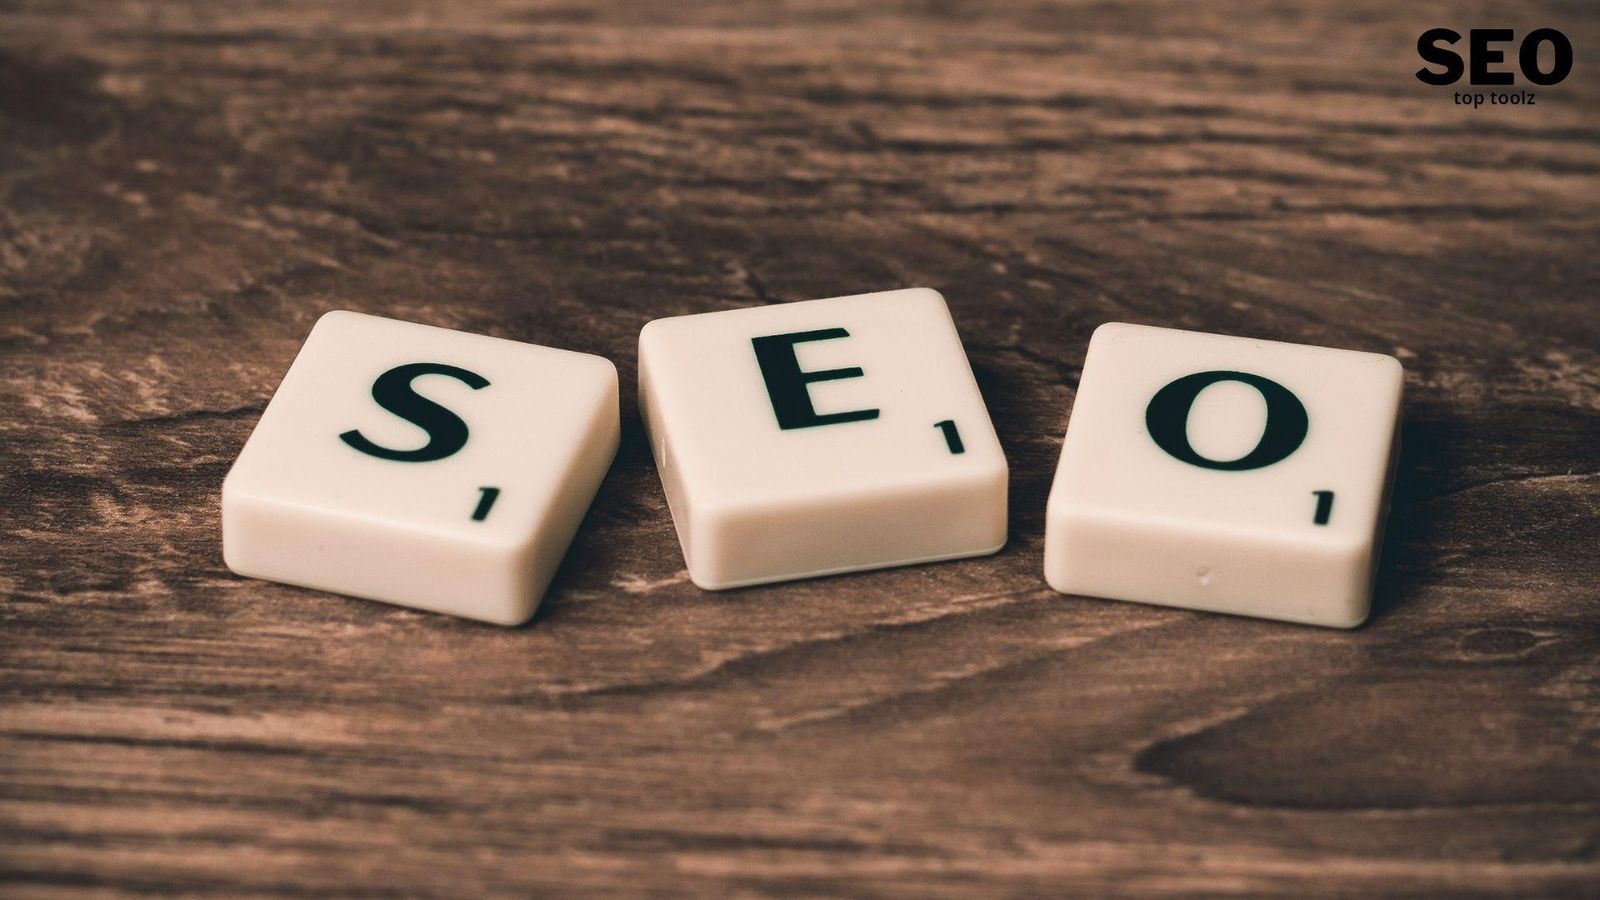 Best Local SEO Services for Small Businesses